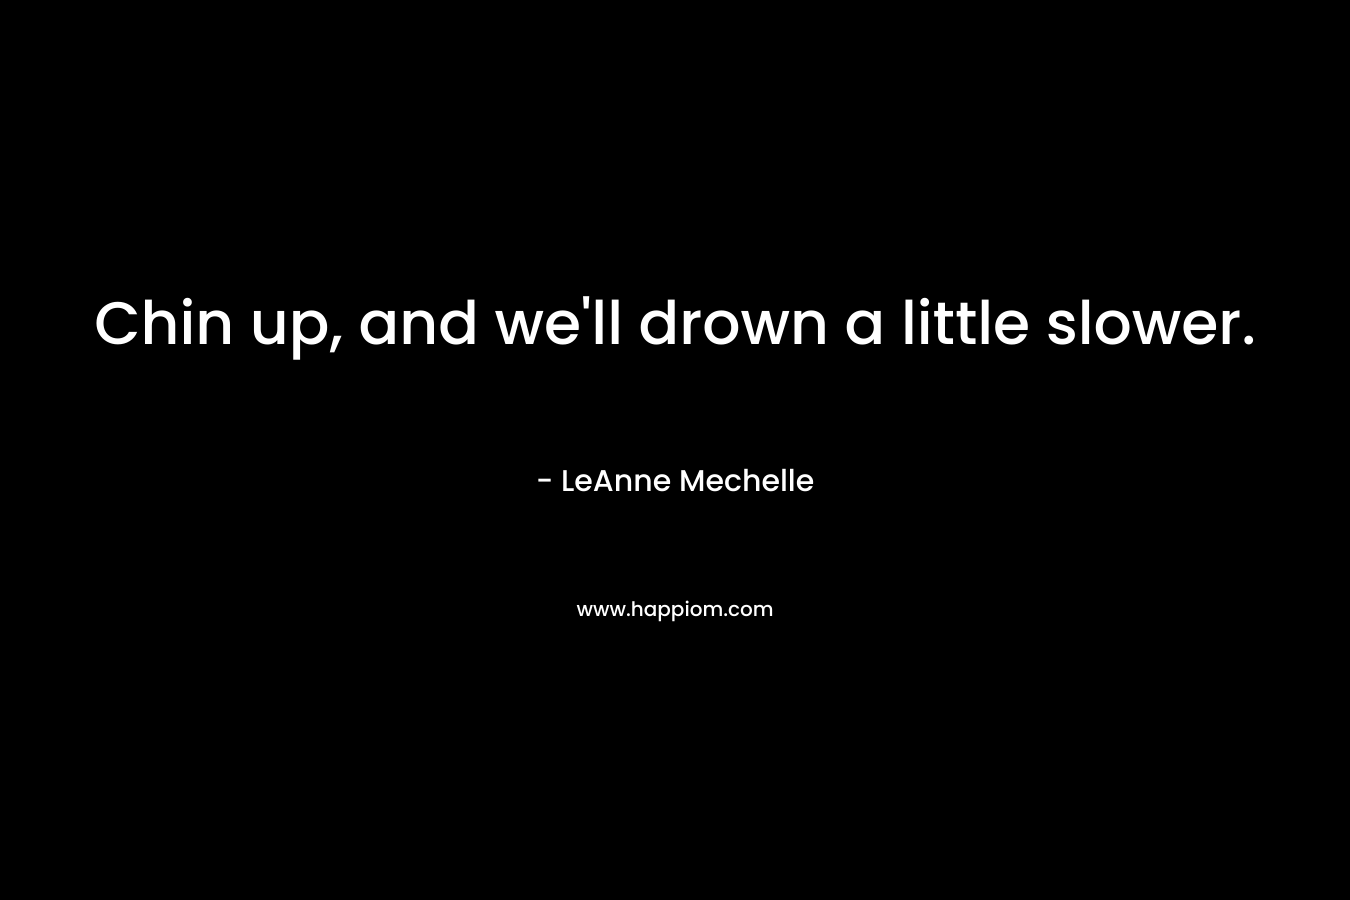 Chin up, and we’ll drown a little slower. – LeAnne Mechelle